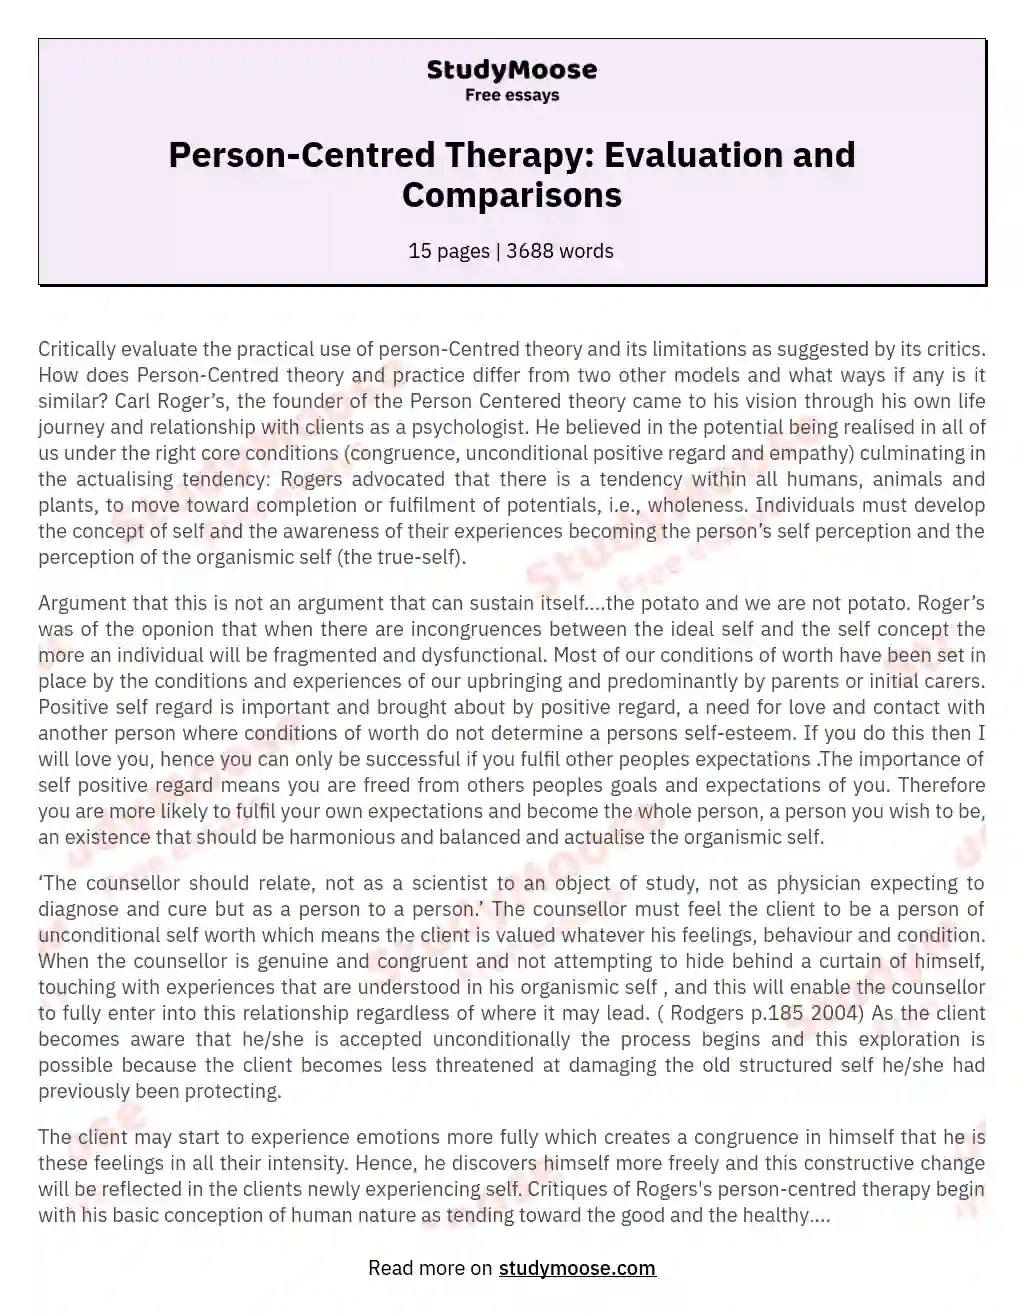 Person-Centred Therapy: Evaluation and Comparisons essay